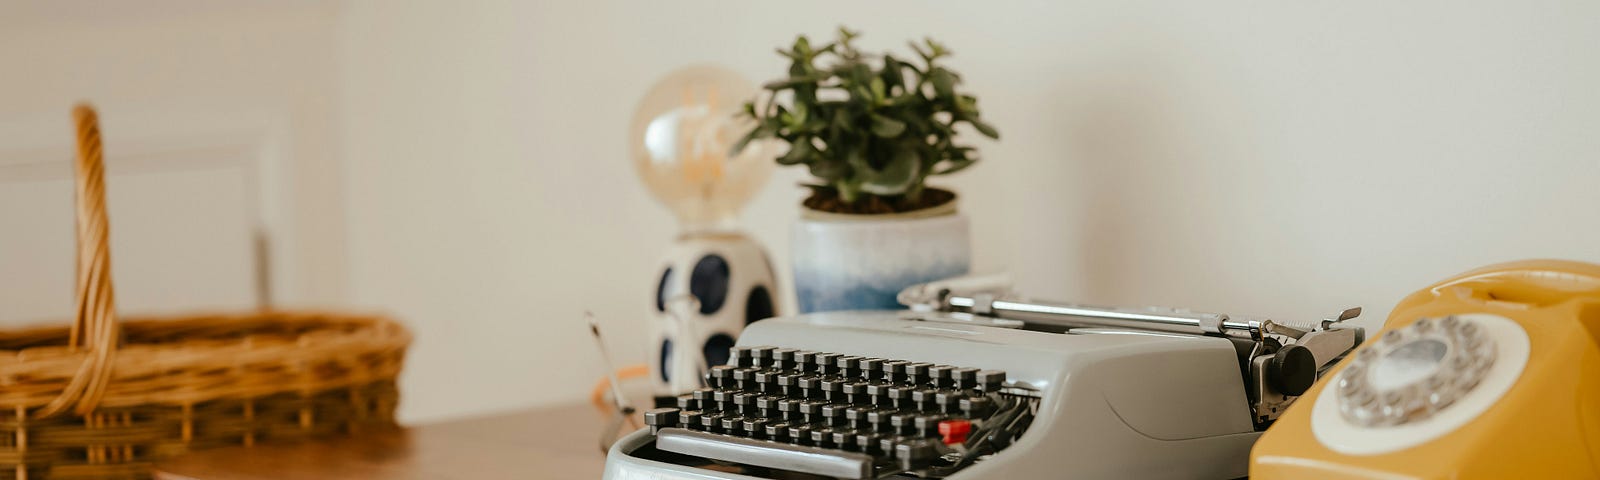 A typewrter and an old dial-up telephone on a writing desk.